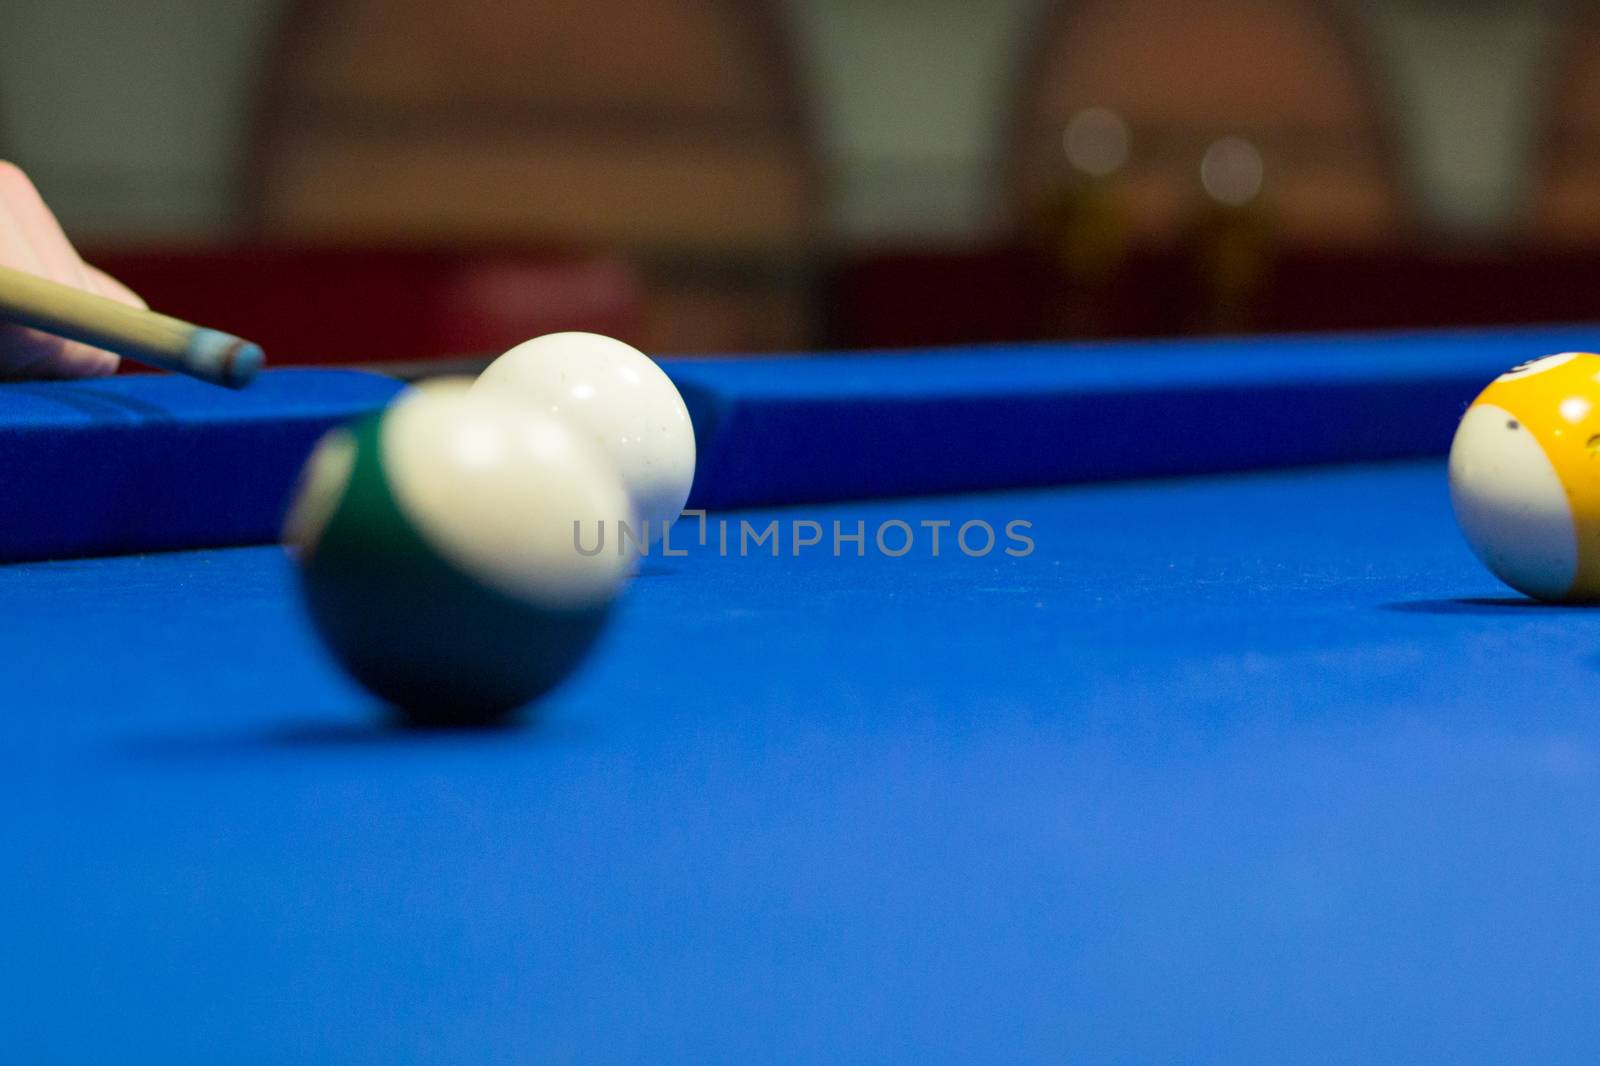 Billiard pool player aims to shoot balls with cue by VeraVerano